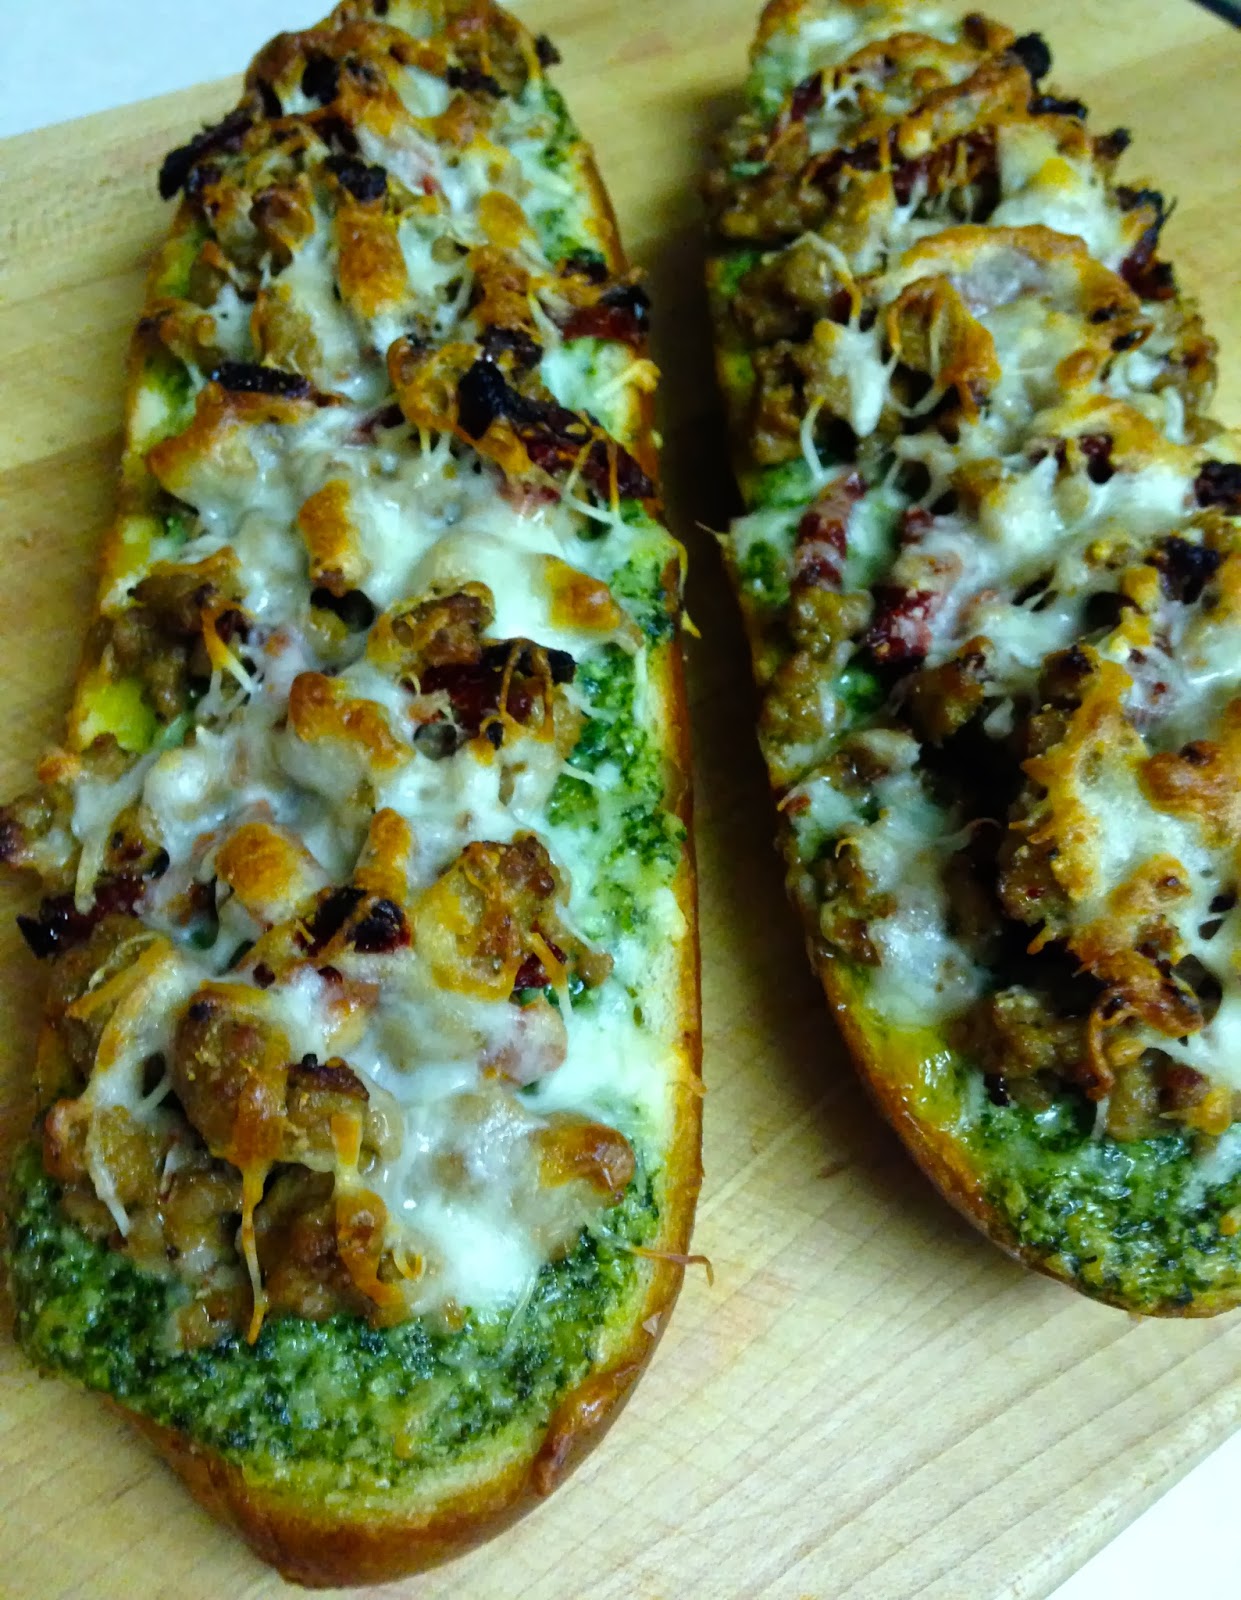 Cooking is Caring: French Bread Pizza with Italian Sausage, Pesto and ...